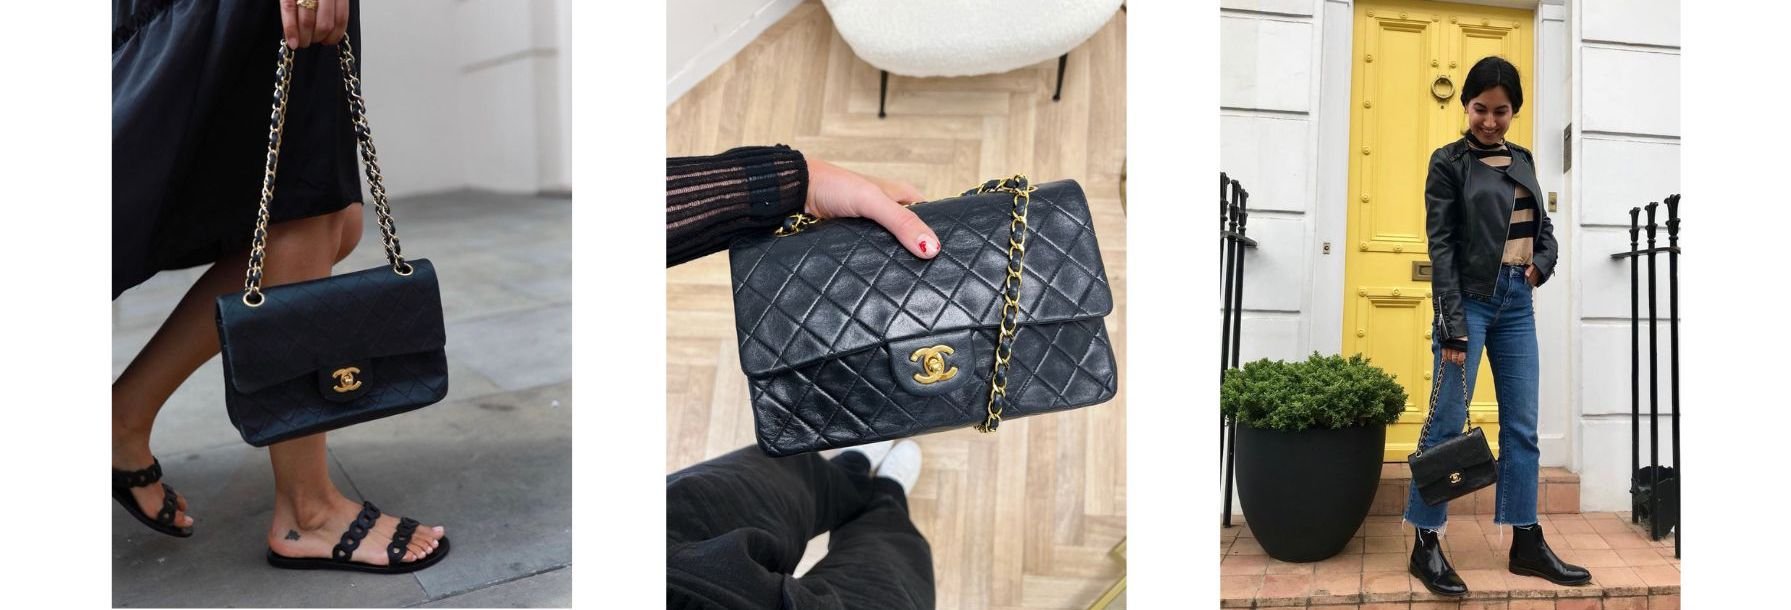 Guide to Buying New Authentic Luxury Bags Online